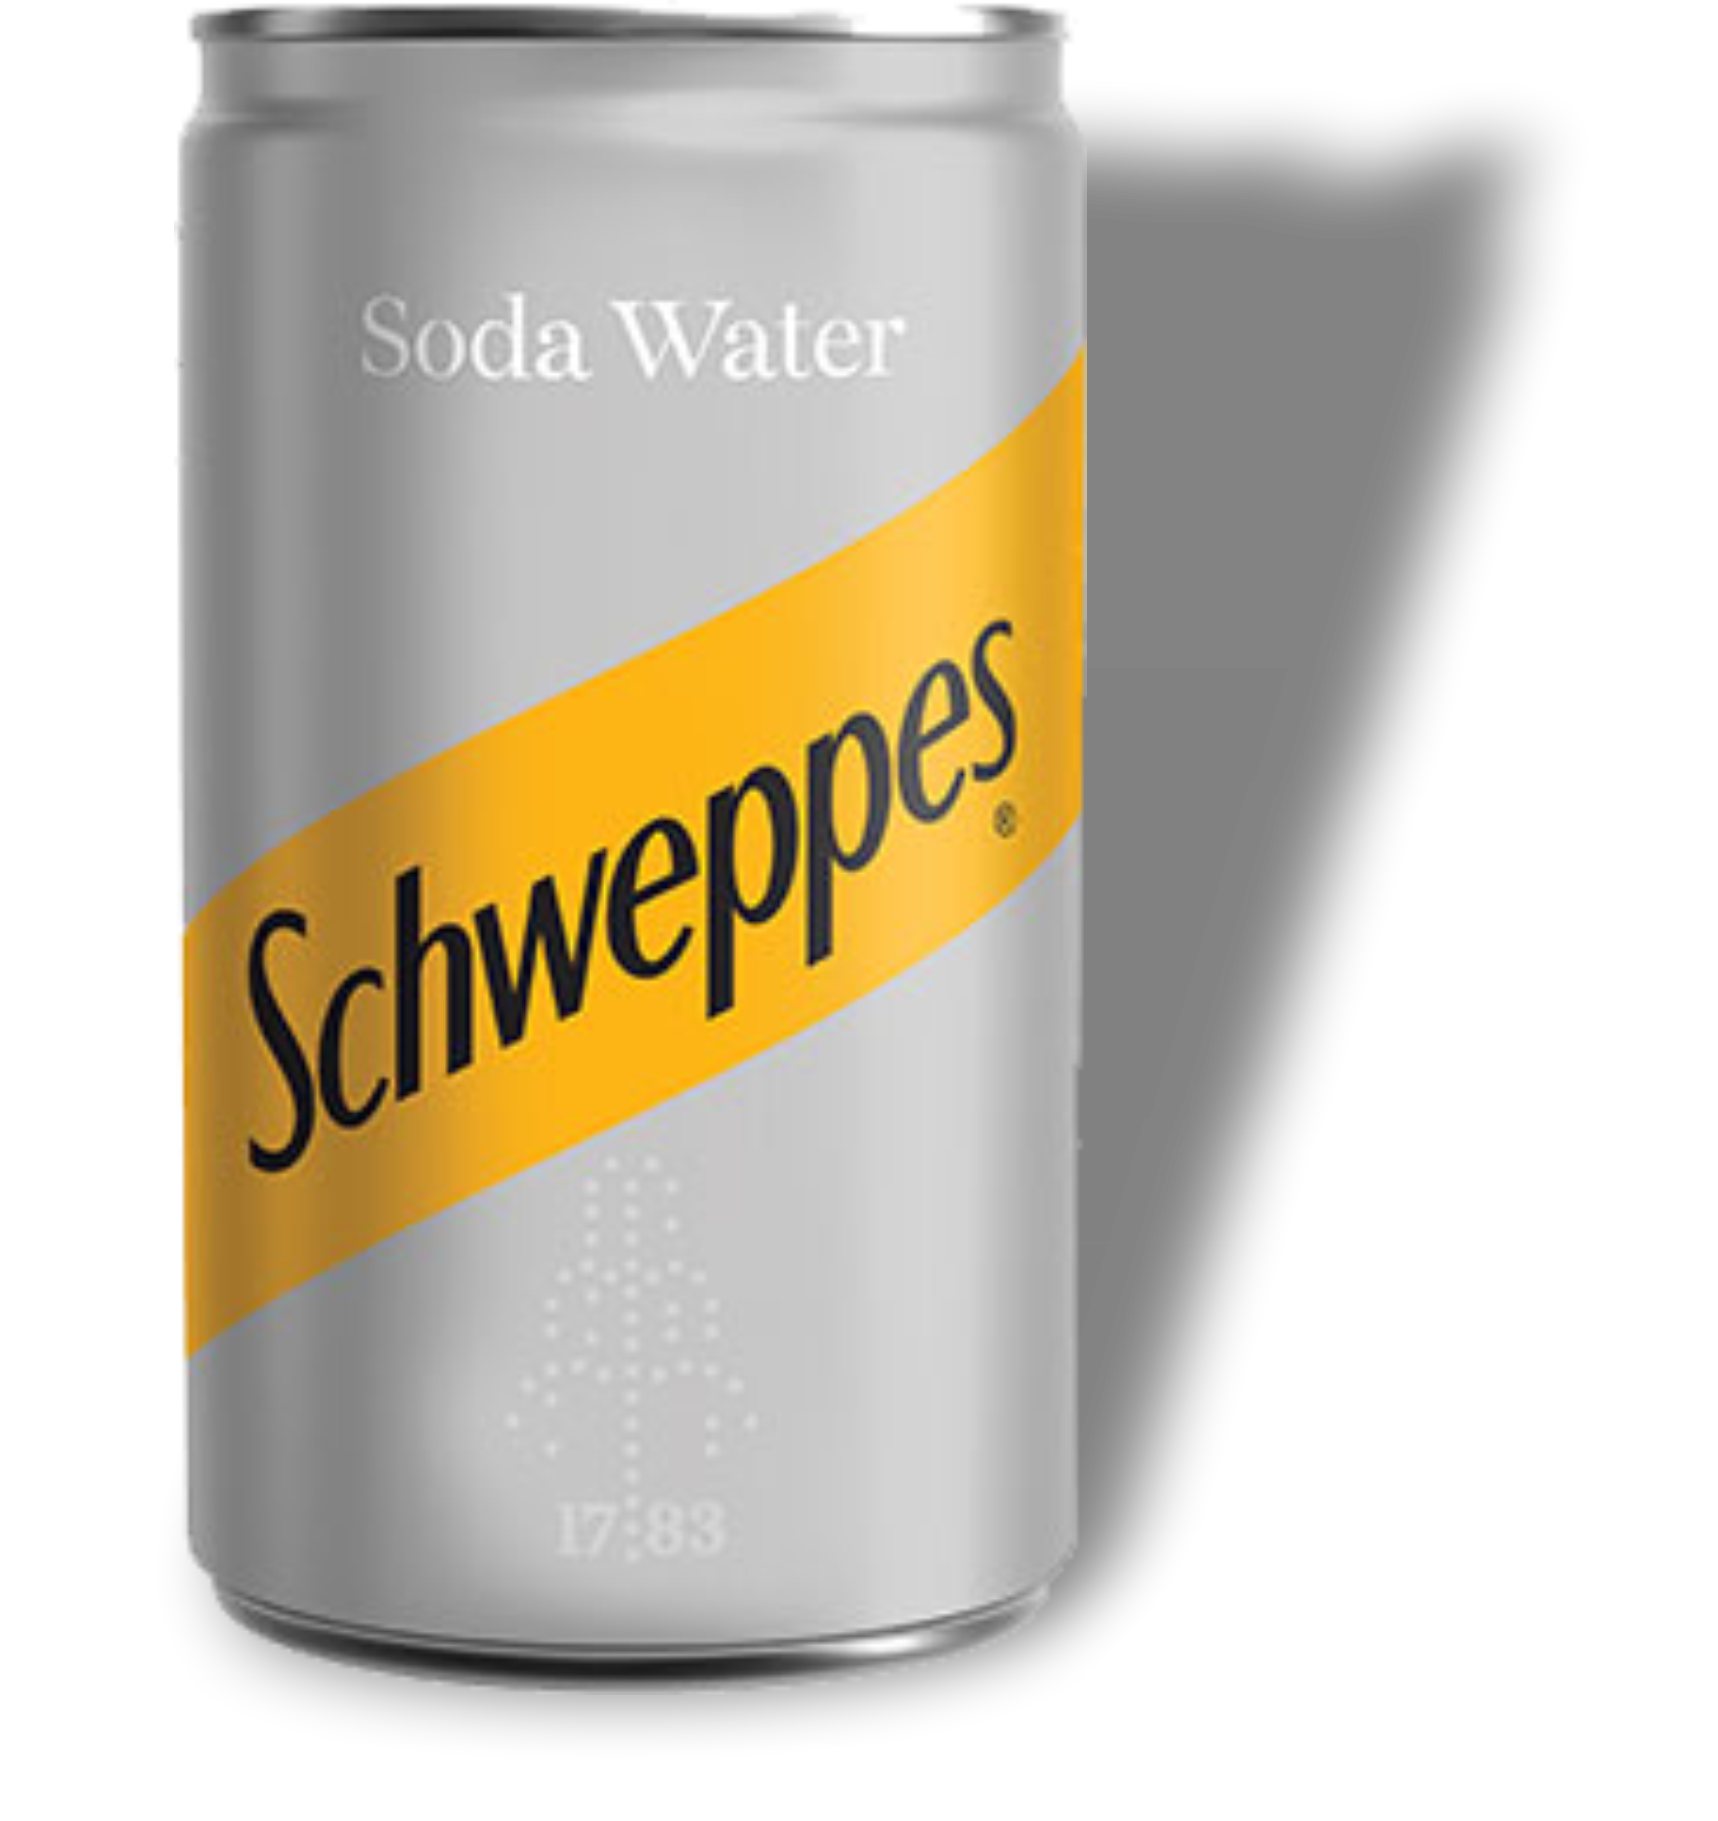 SCHWEPPES SODA WATER 15cl CANS 1x24 [S016]